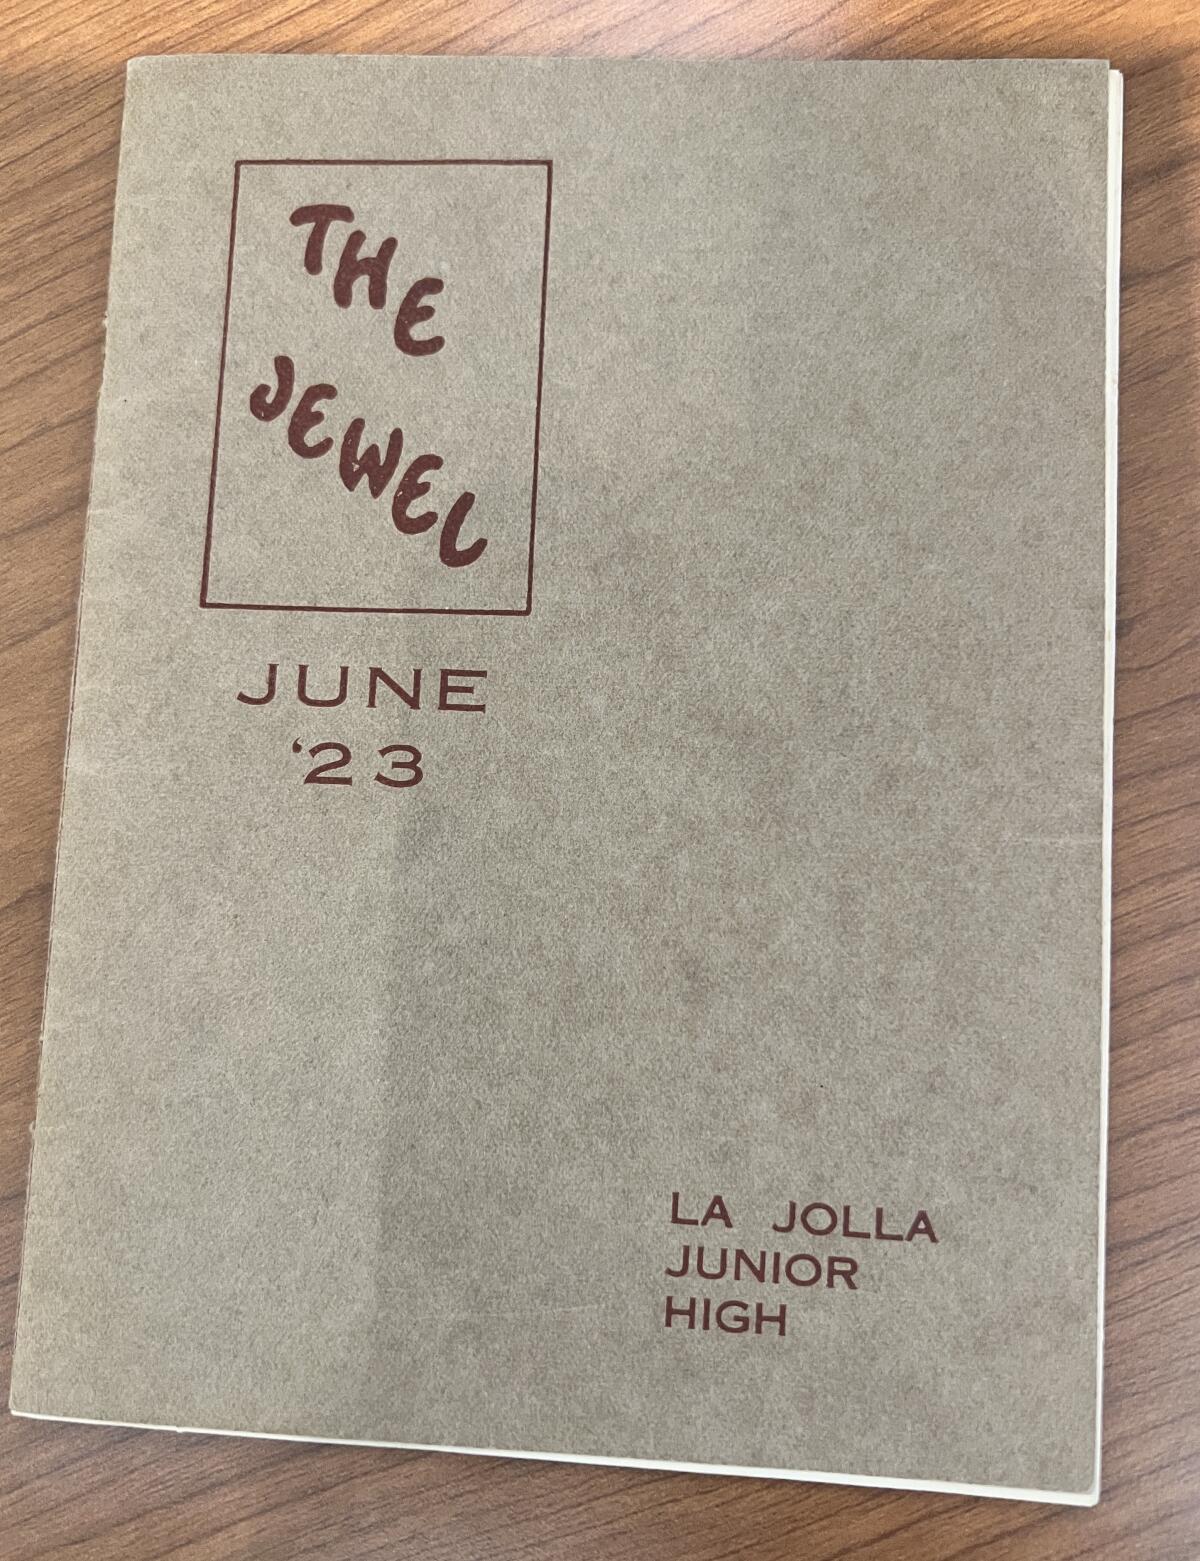 La Jolla High School's first yearbook, "The Jewel," published in June 1923, lists 14 students in 10th grade. 